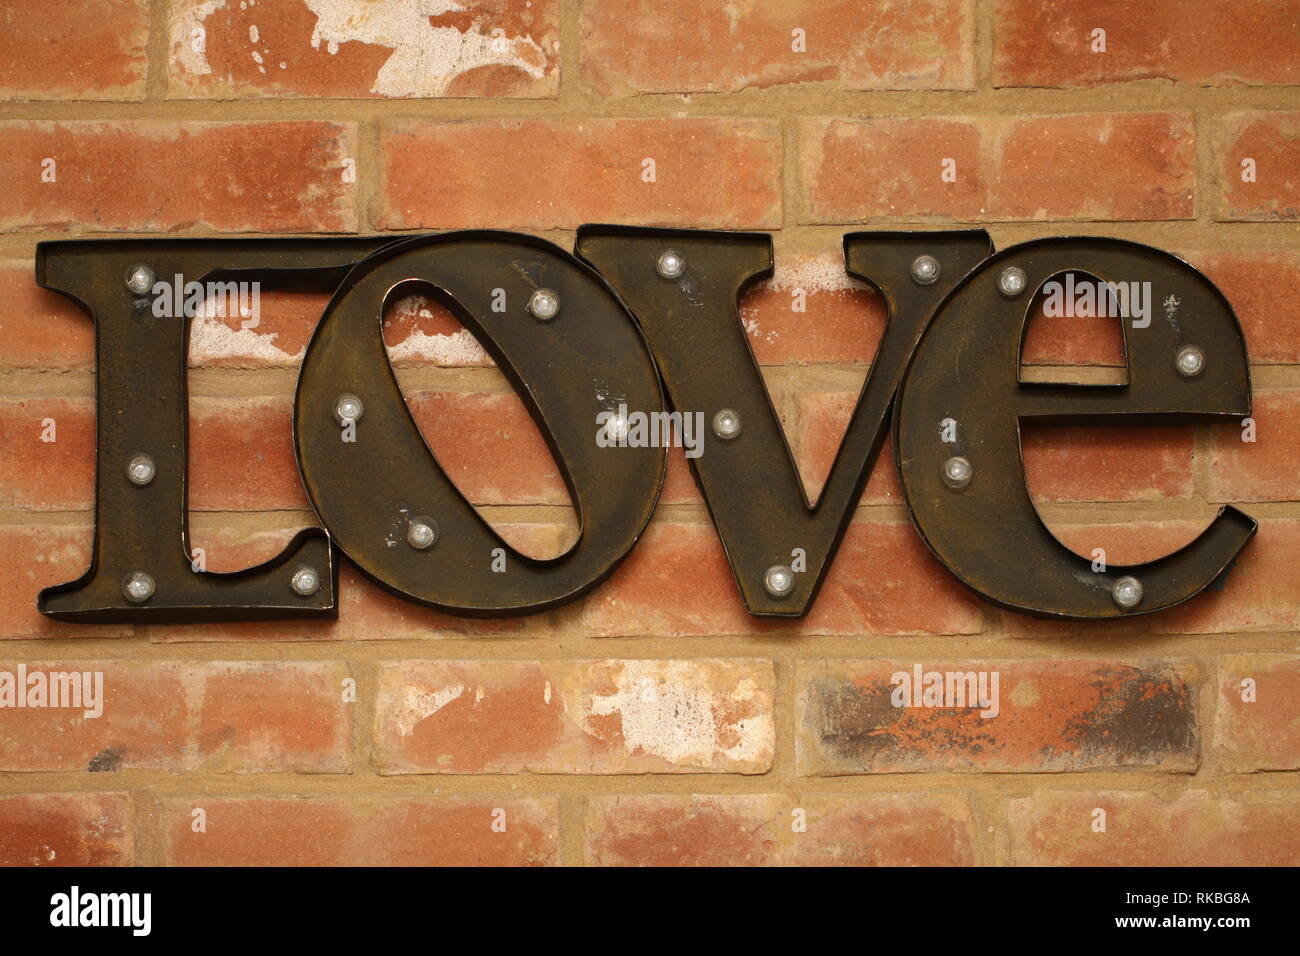 Brown metal Love sign mounted on red brick wall Stock Photo